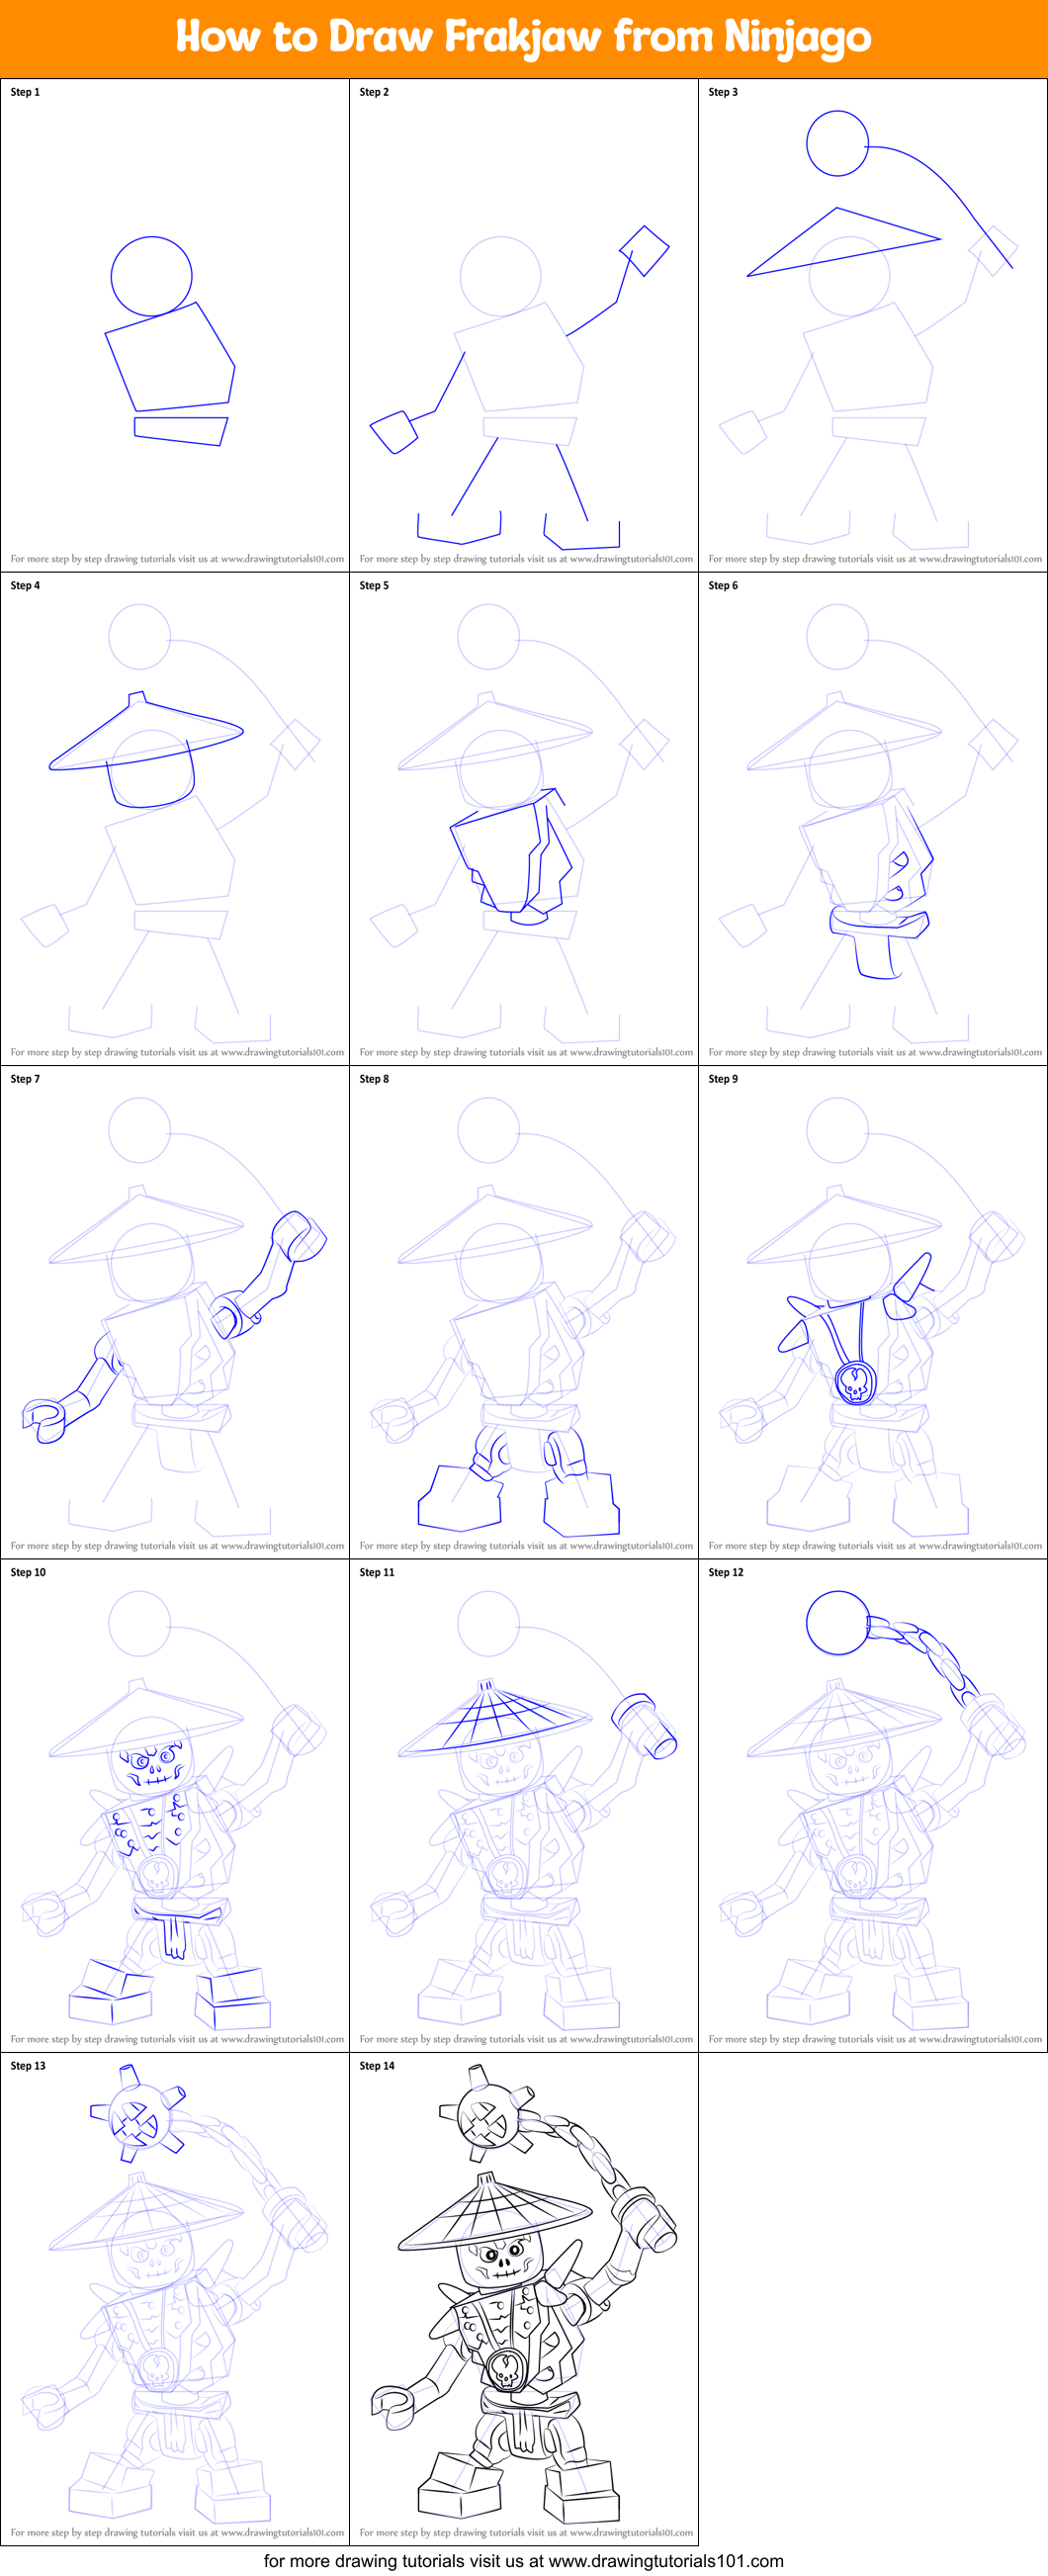 How to Draw Frakjaw from Ninjago (Ninjago) Step by Step ...